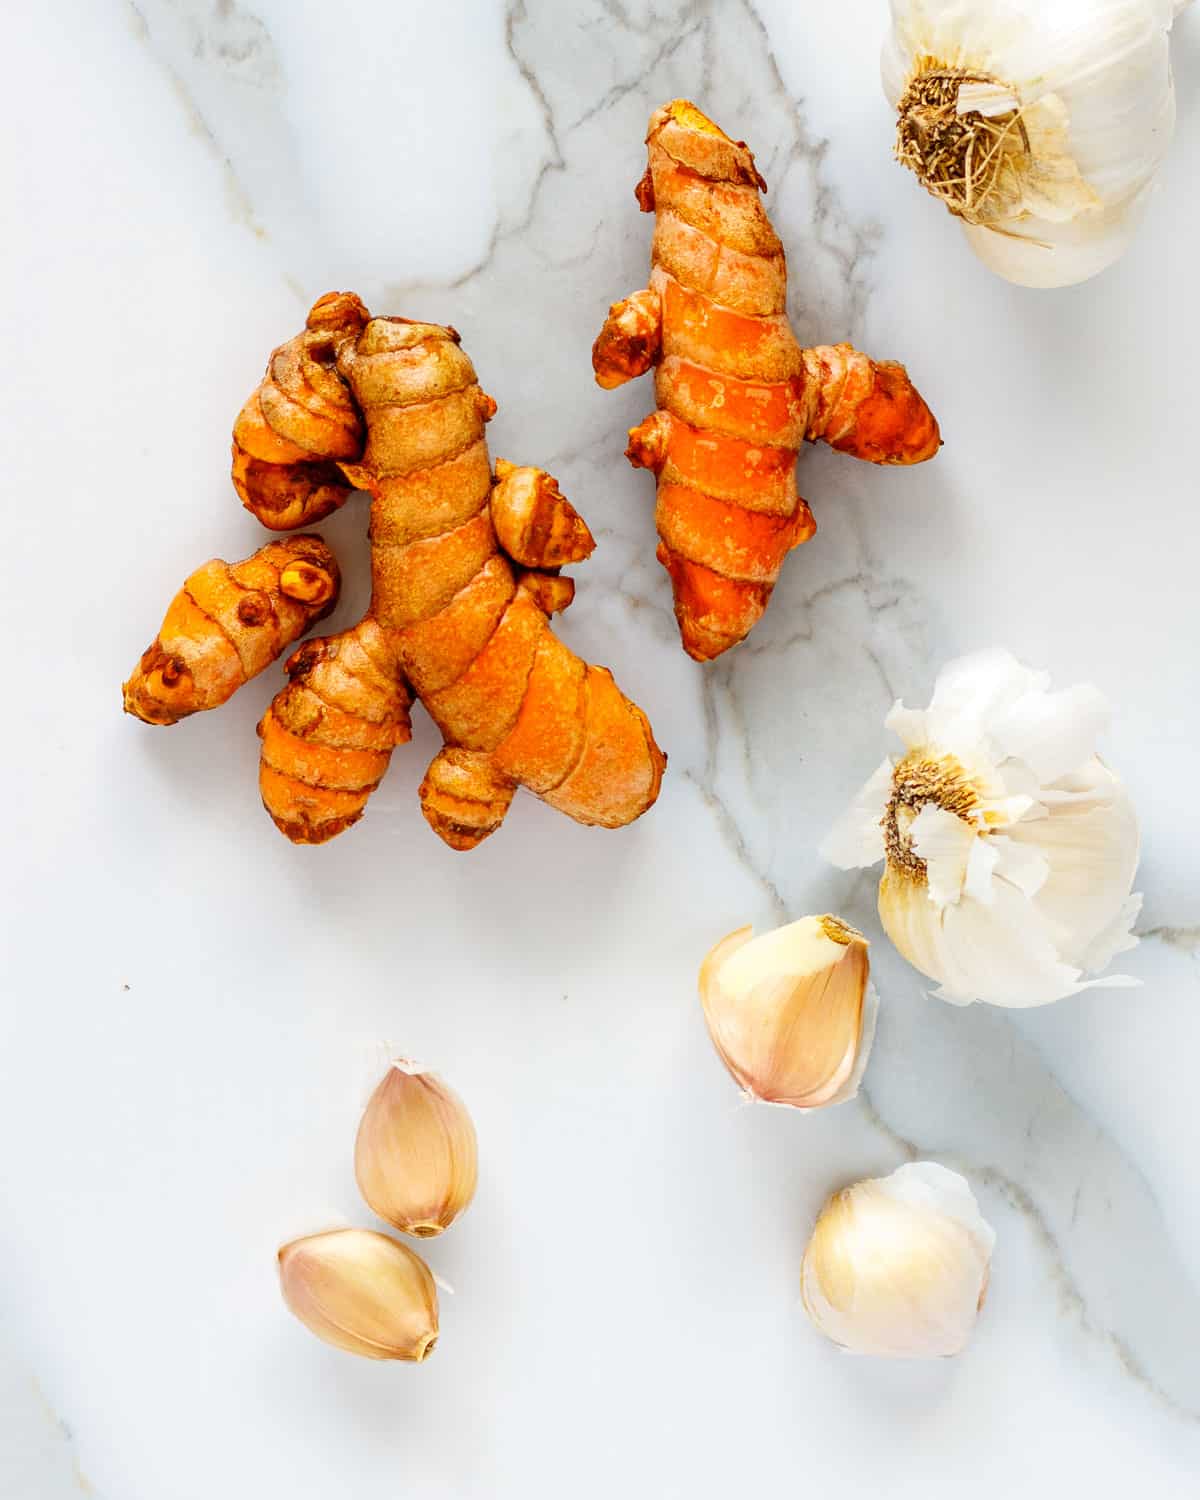 Whole turmeric root and unpeeled garlic cloves.